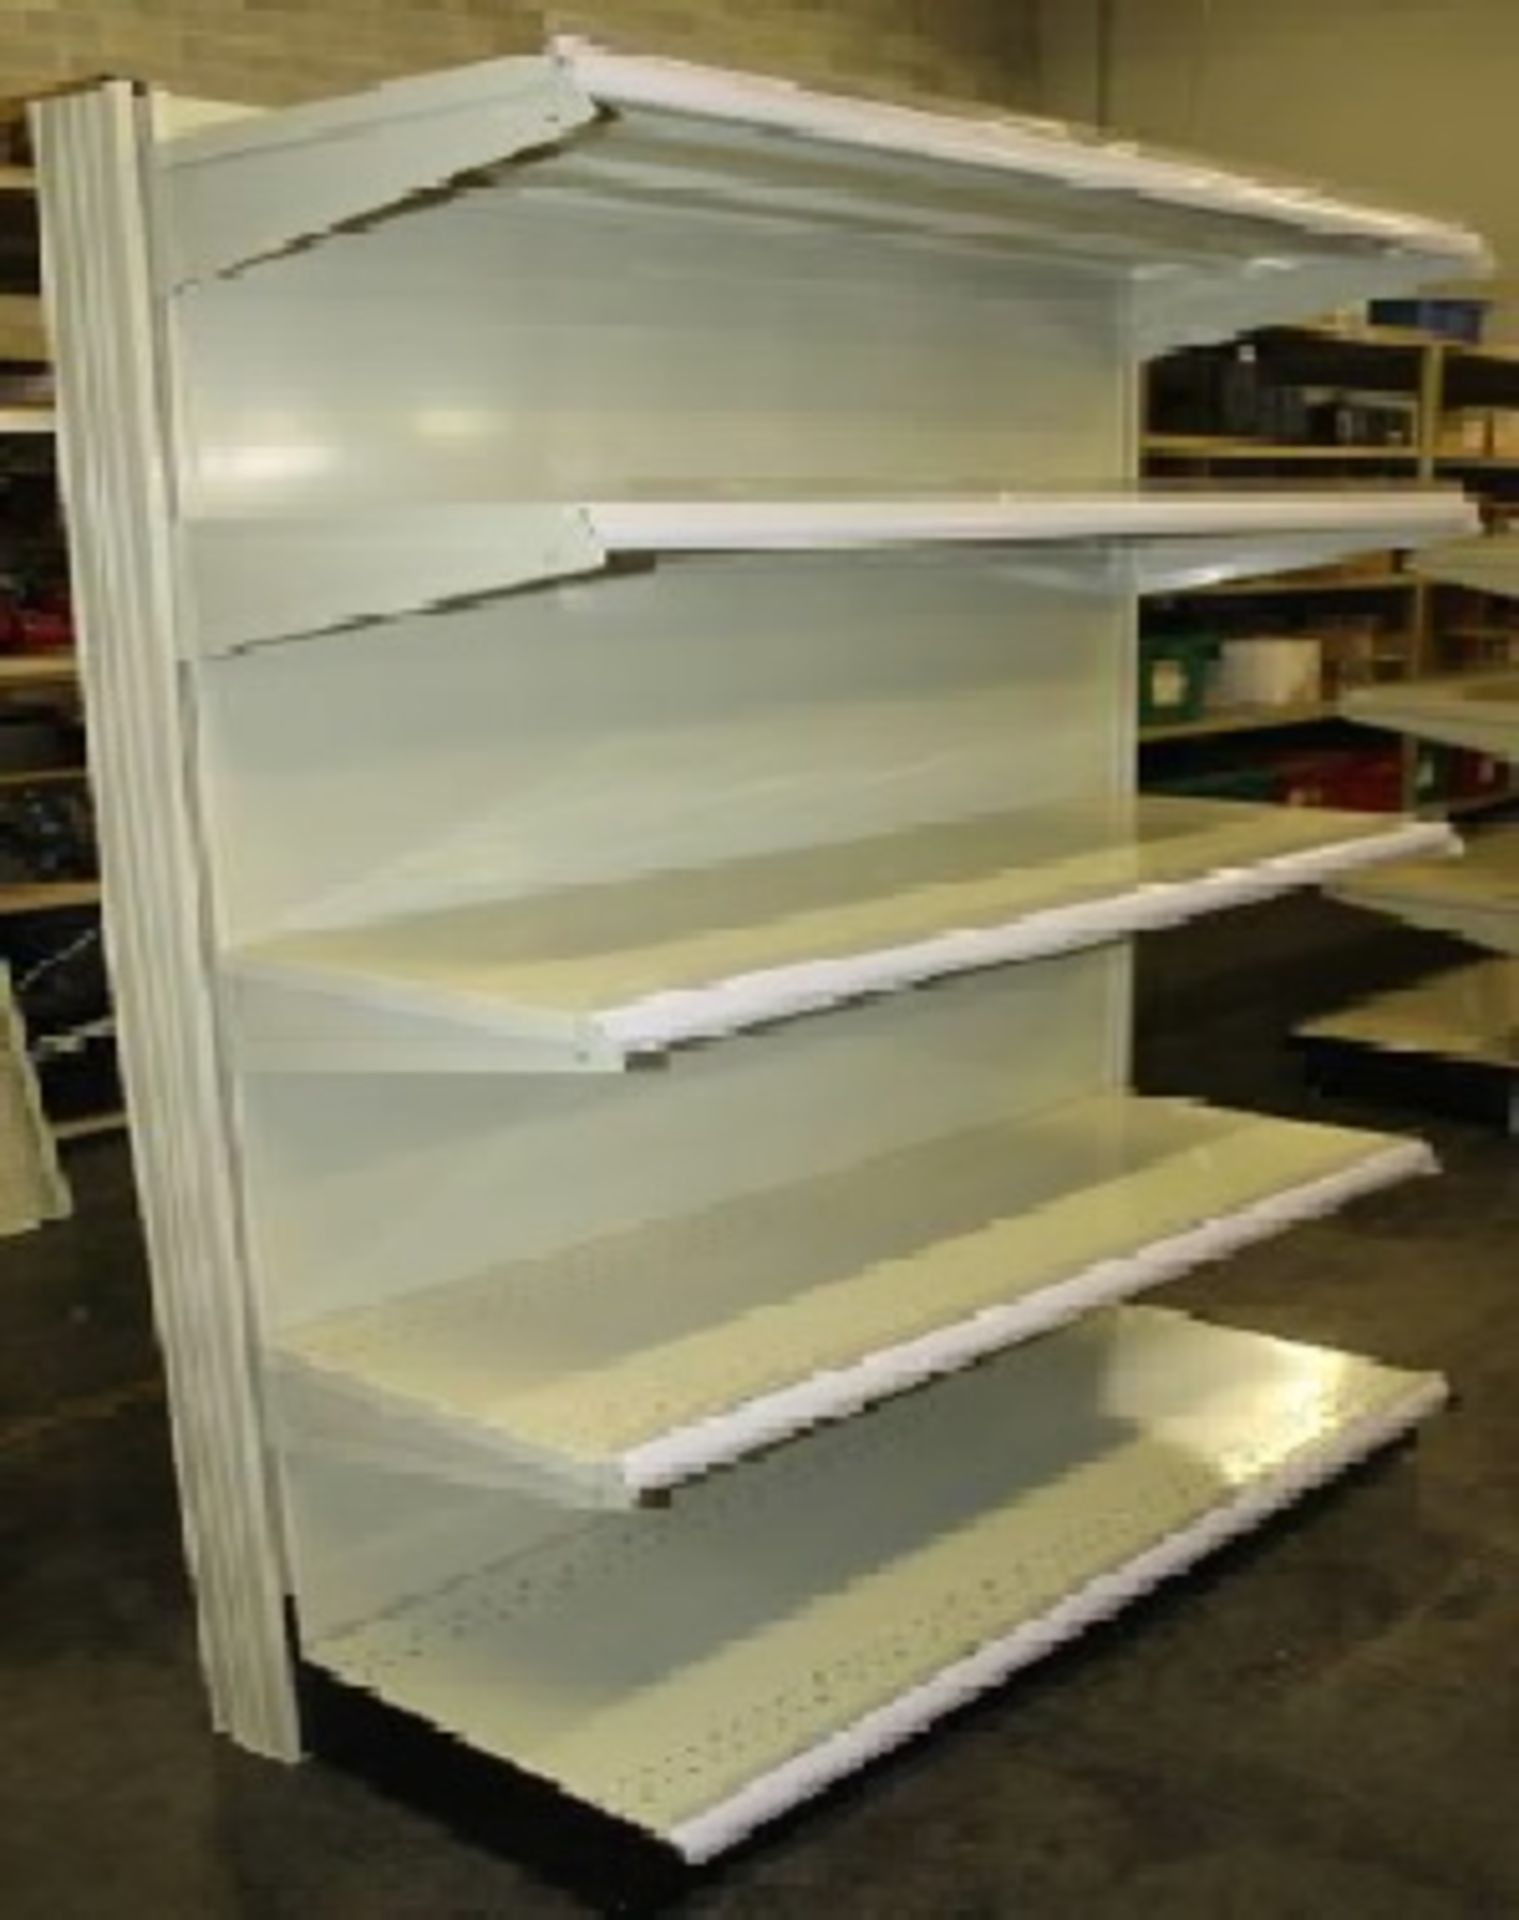 5 SECTIONS OF GONDOLA SHELVING WITH 4 SHELVES LEVEL DOUBLE SIDED